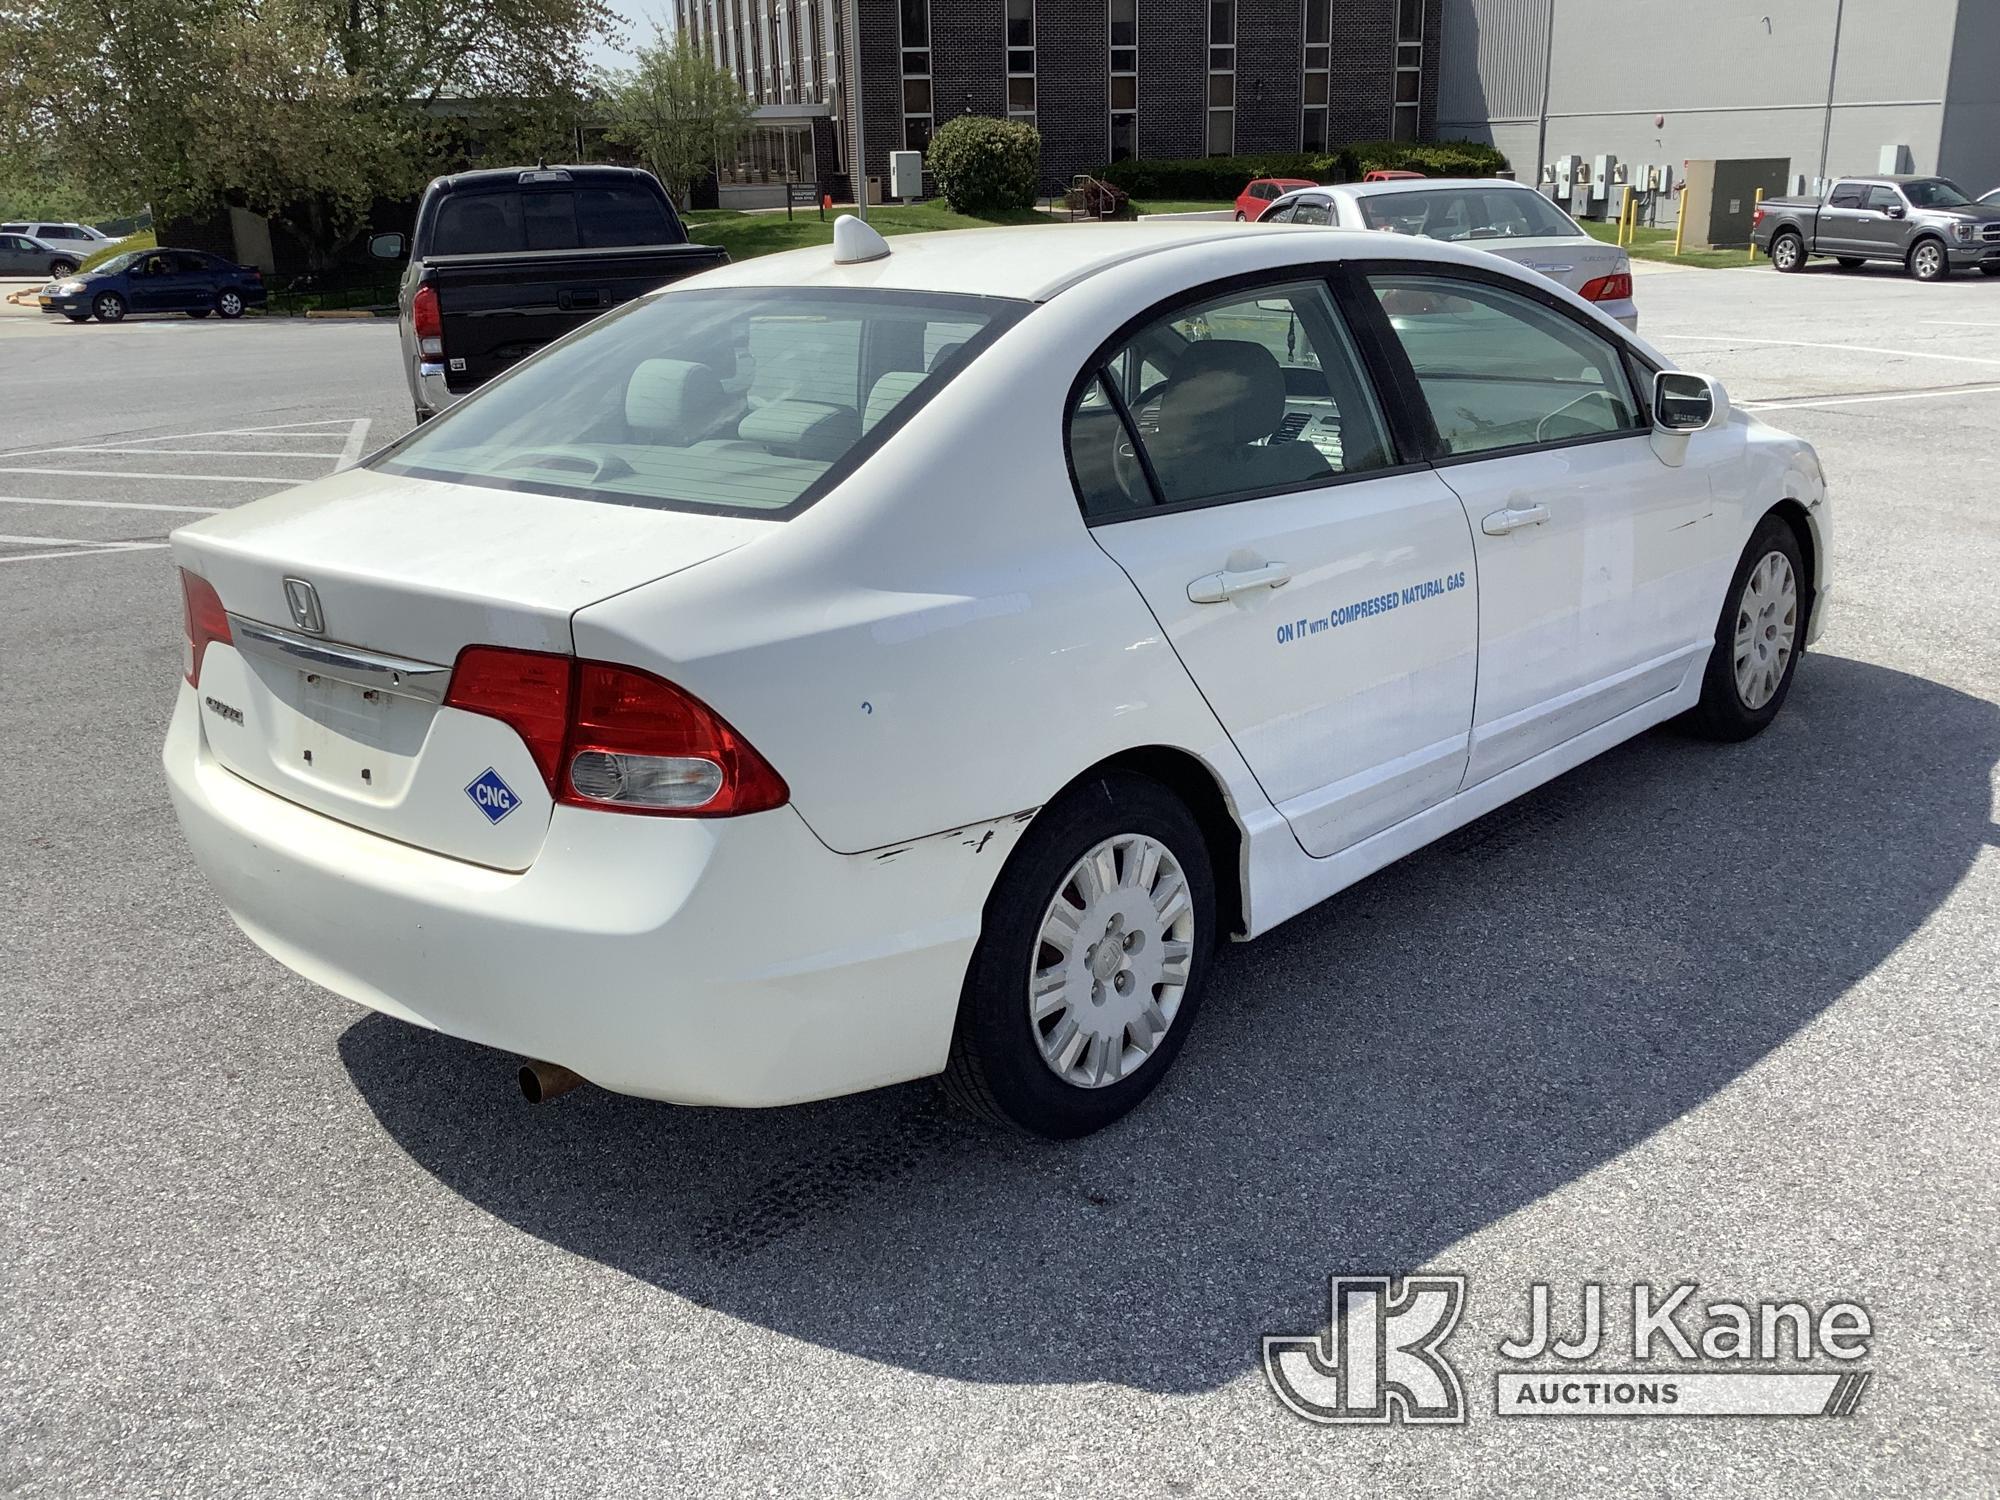 (Chester Springs, PA) 2009 Honda Civic 4-Door Sedan CNG Only) (Runs & Moves, Rust & Body Damage) (In